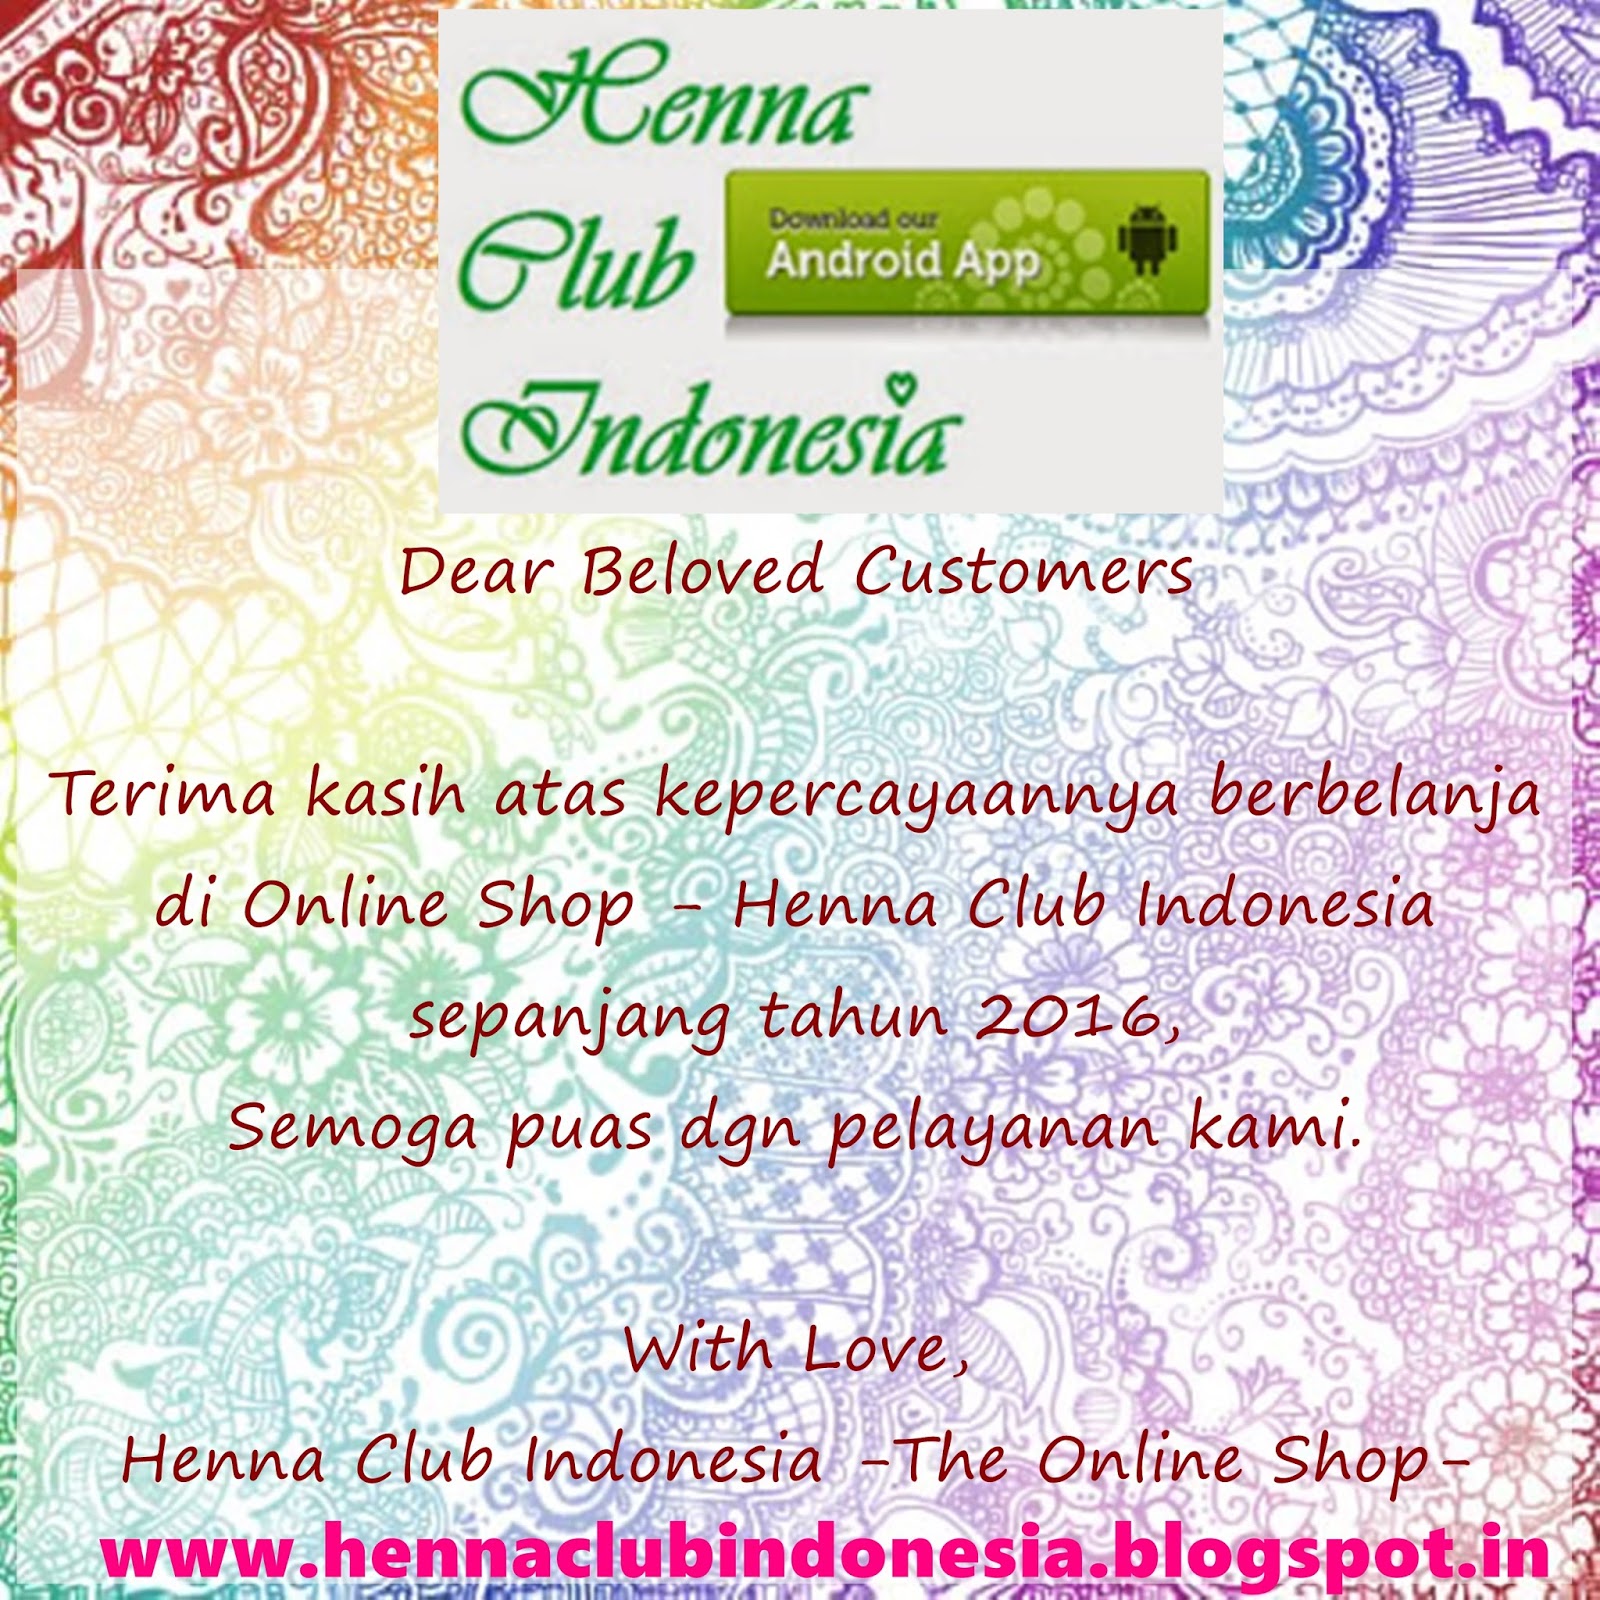 Henna Club Indonesia: Testimony Customers - Thank you for shopping here